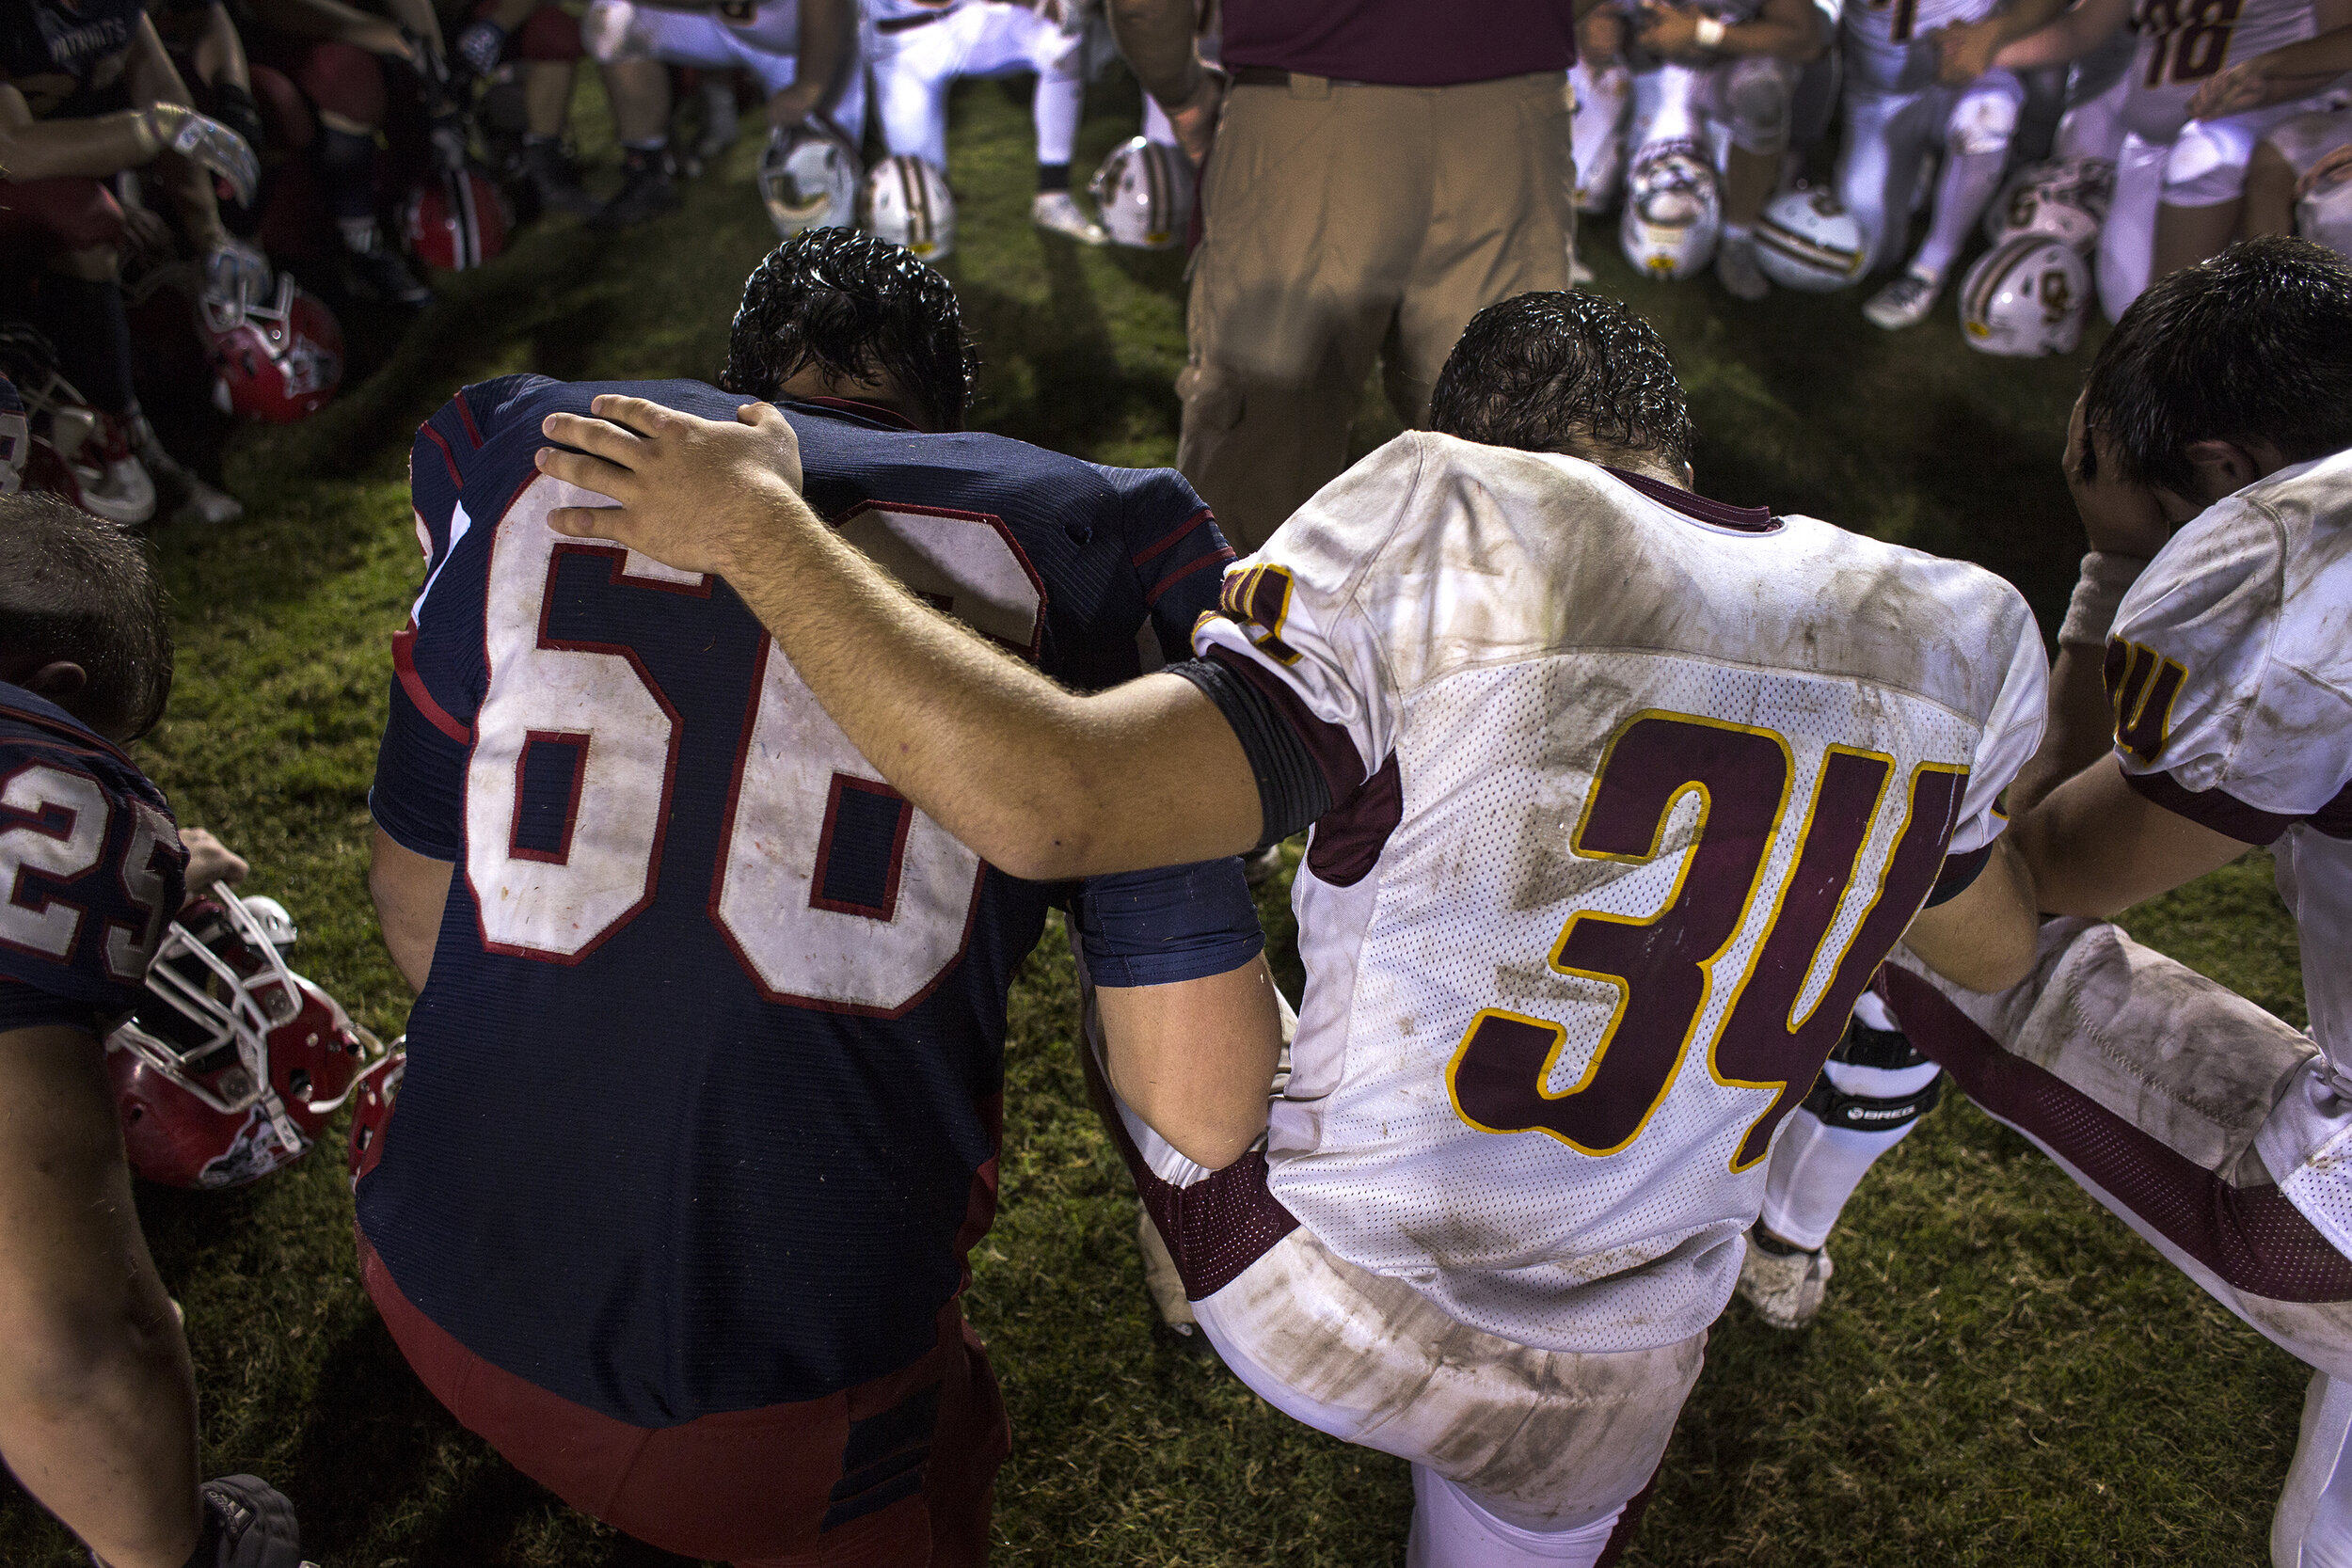  Heritage Hills’ Spencer Buse and Gibson Southern’s Dylan Stefanich said a prayer with other Patriots and Titans during a group prayer following Heritage Hills’ 48-7 loss to the Gibson Southern on Sept. 22 in Lincoln City, Indiana.  